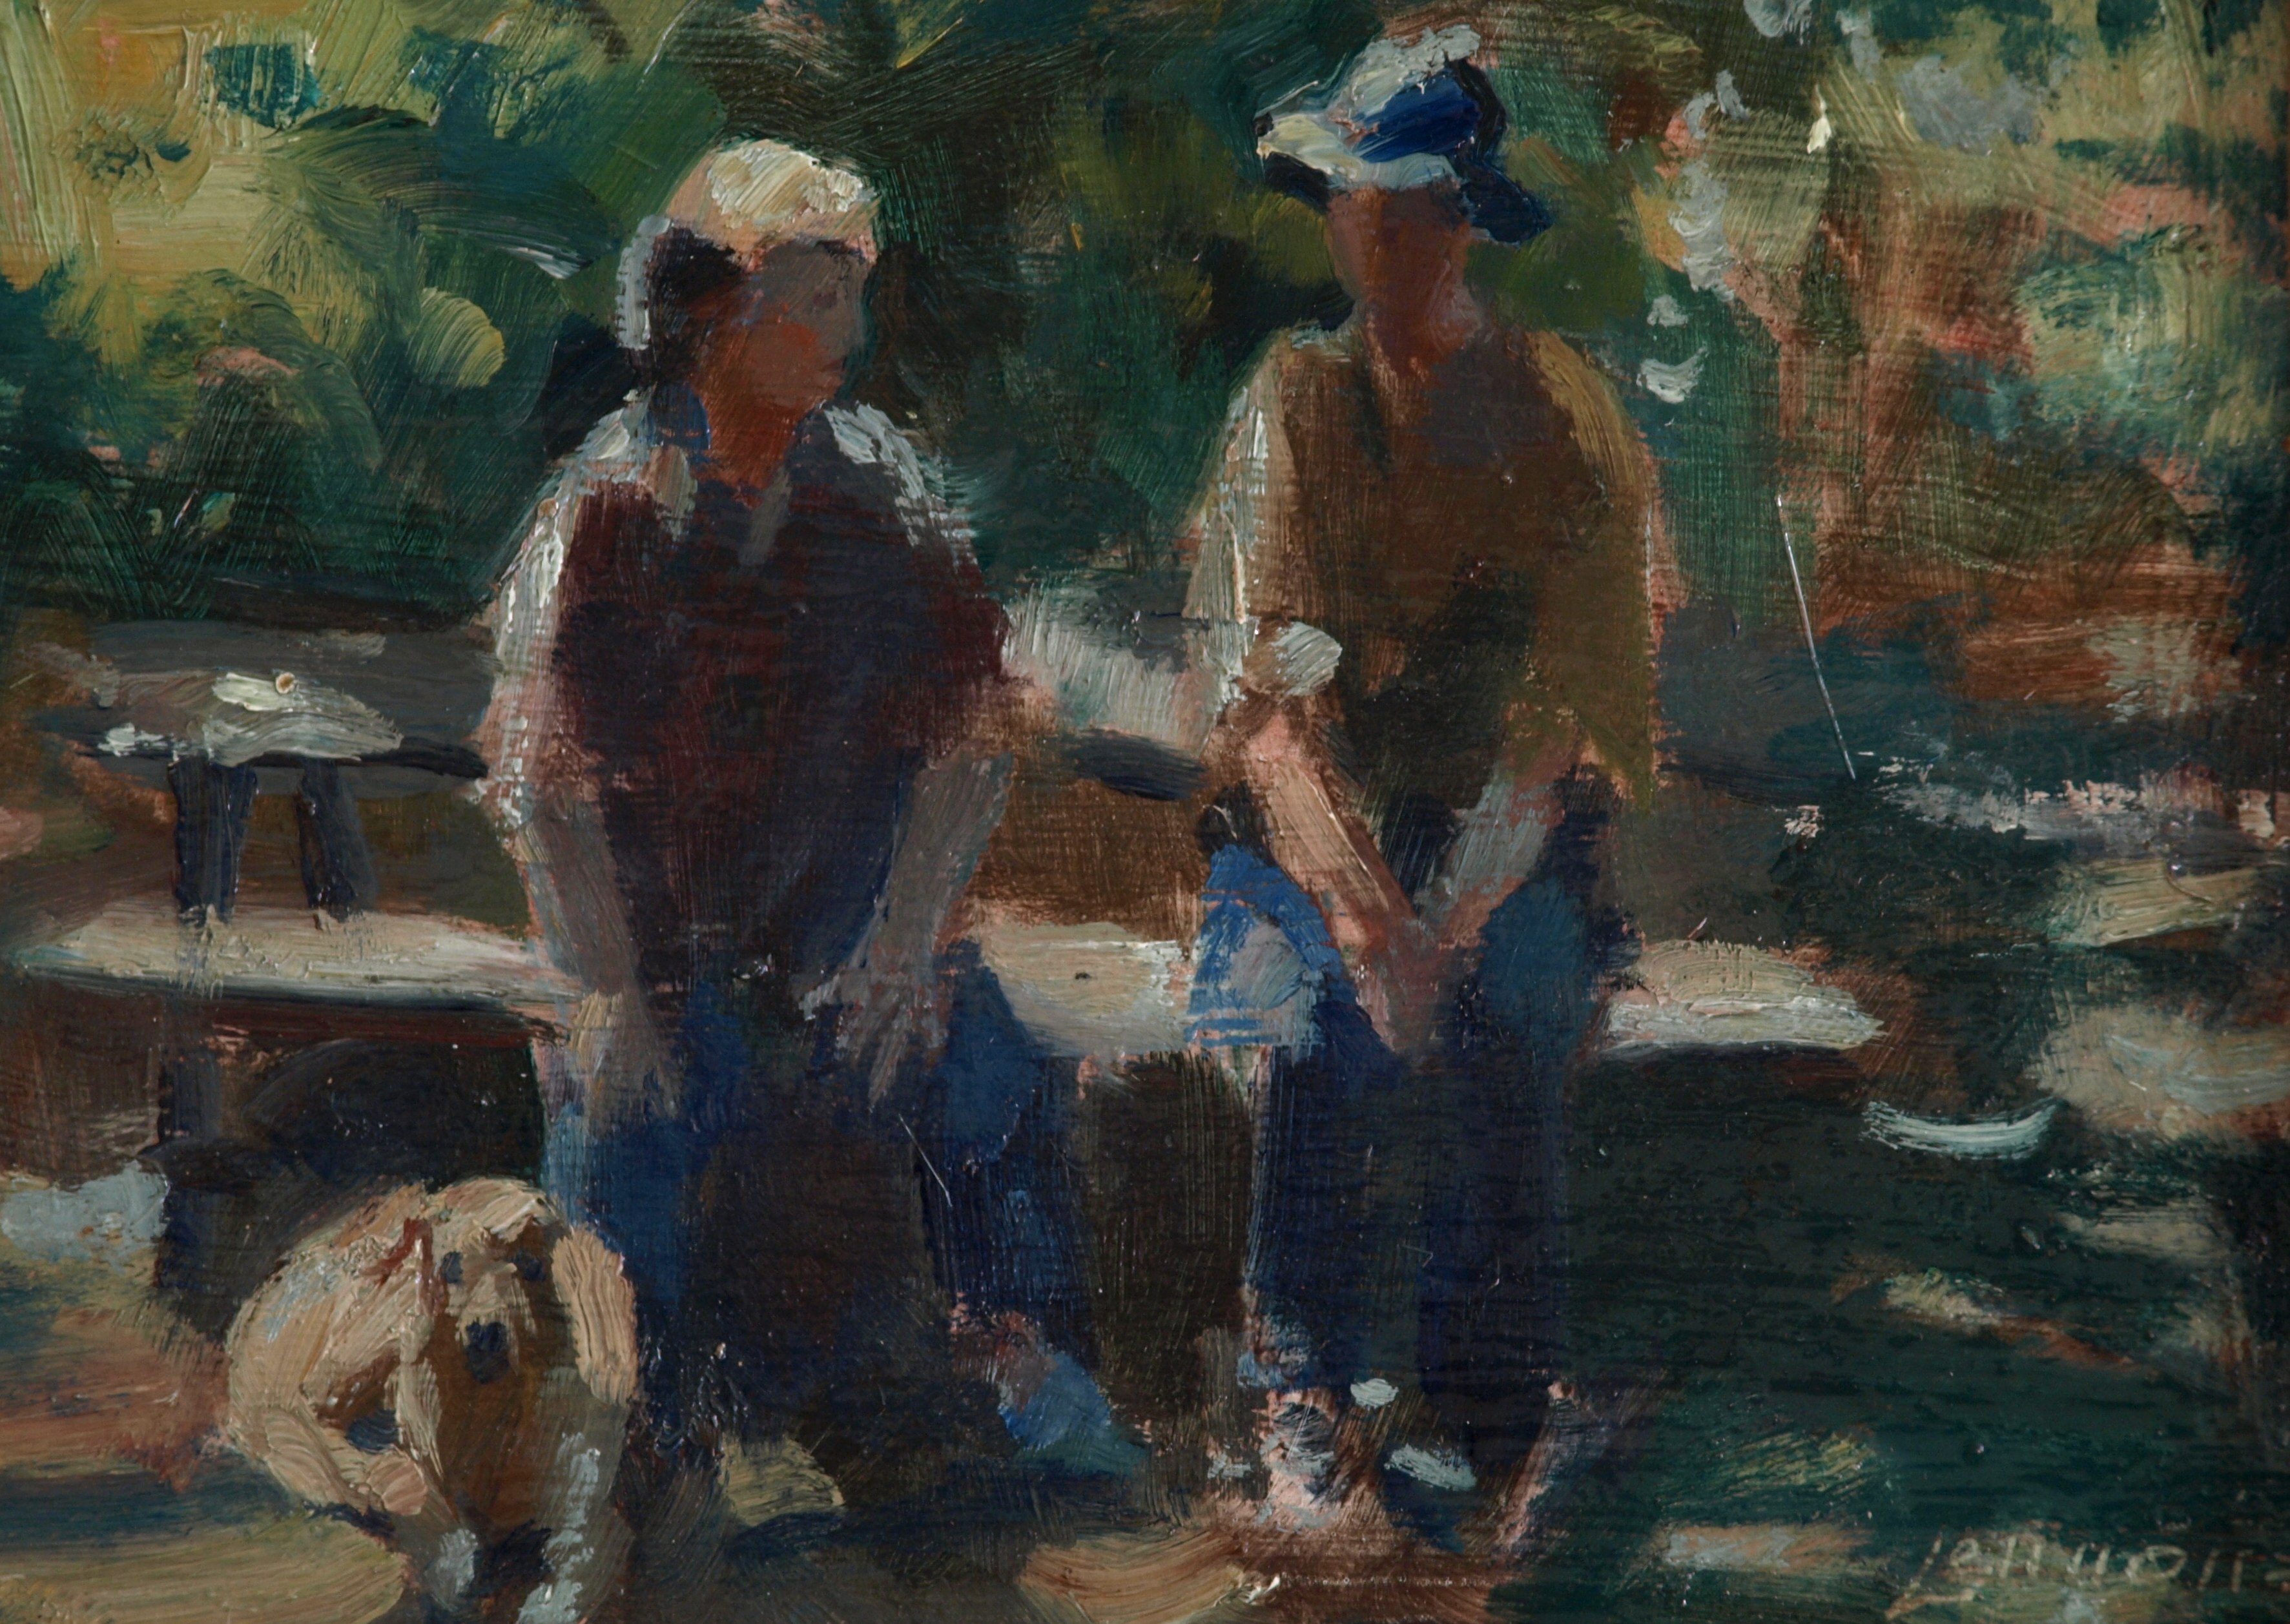 Ruth Sue and Utie, Oil on Panel, 8 x 12 Inches, by Bernard Lennon, $225